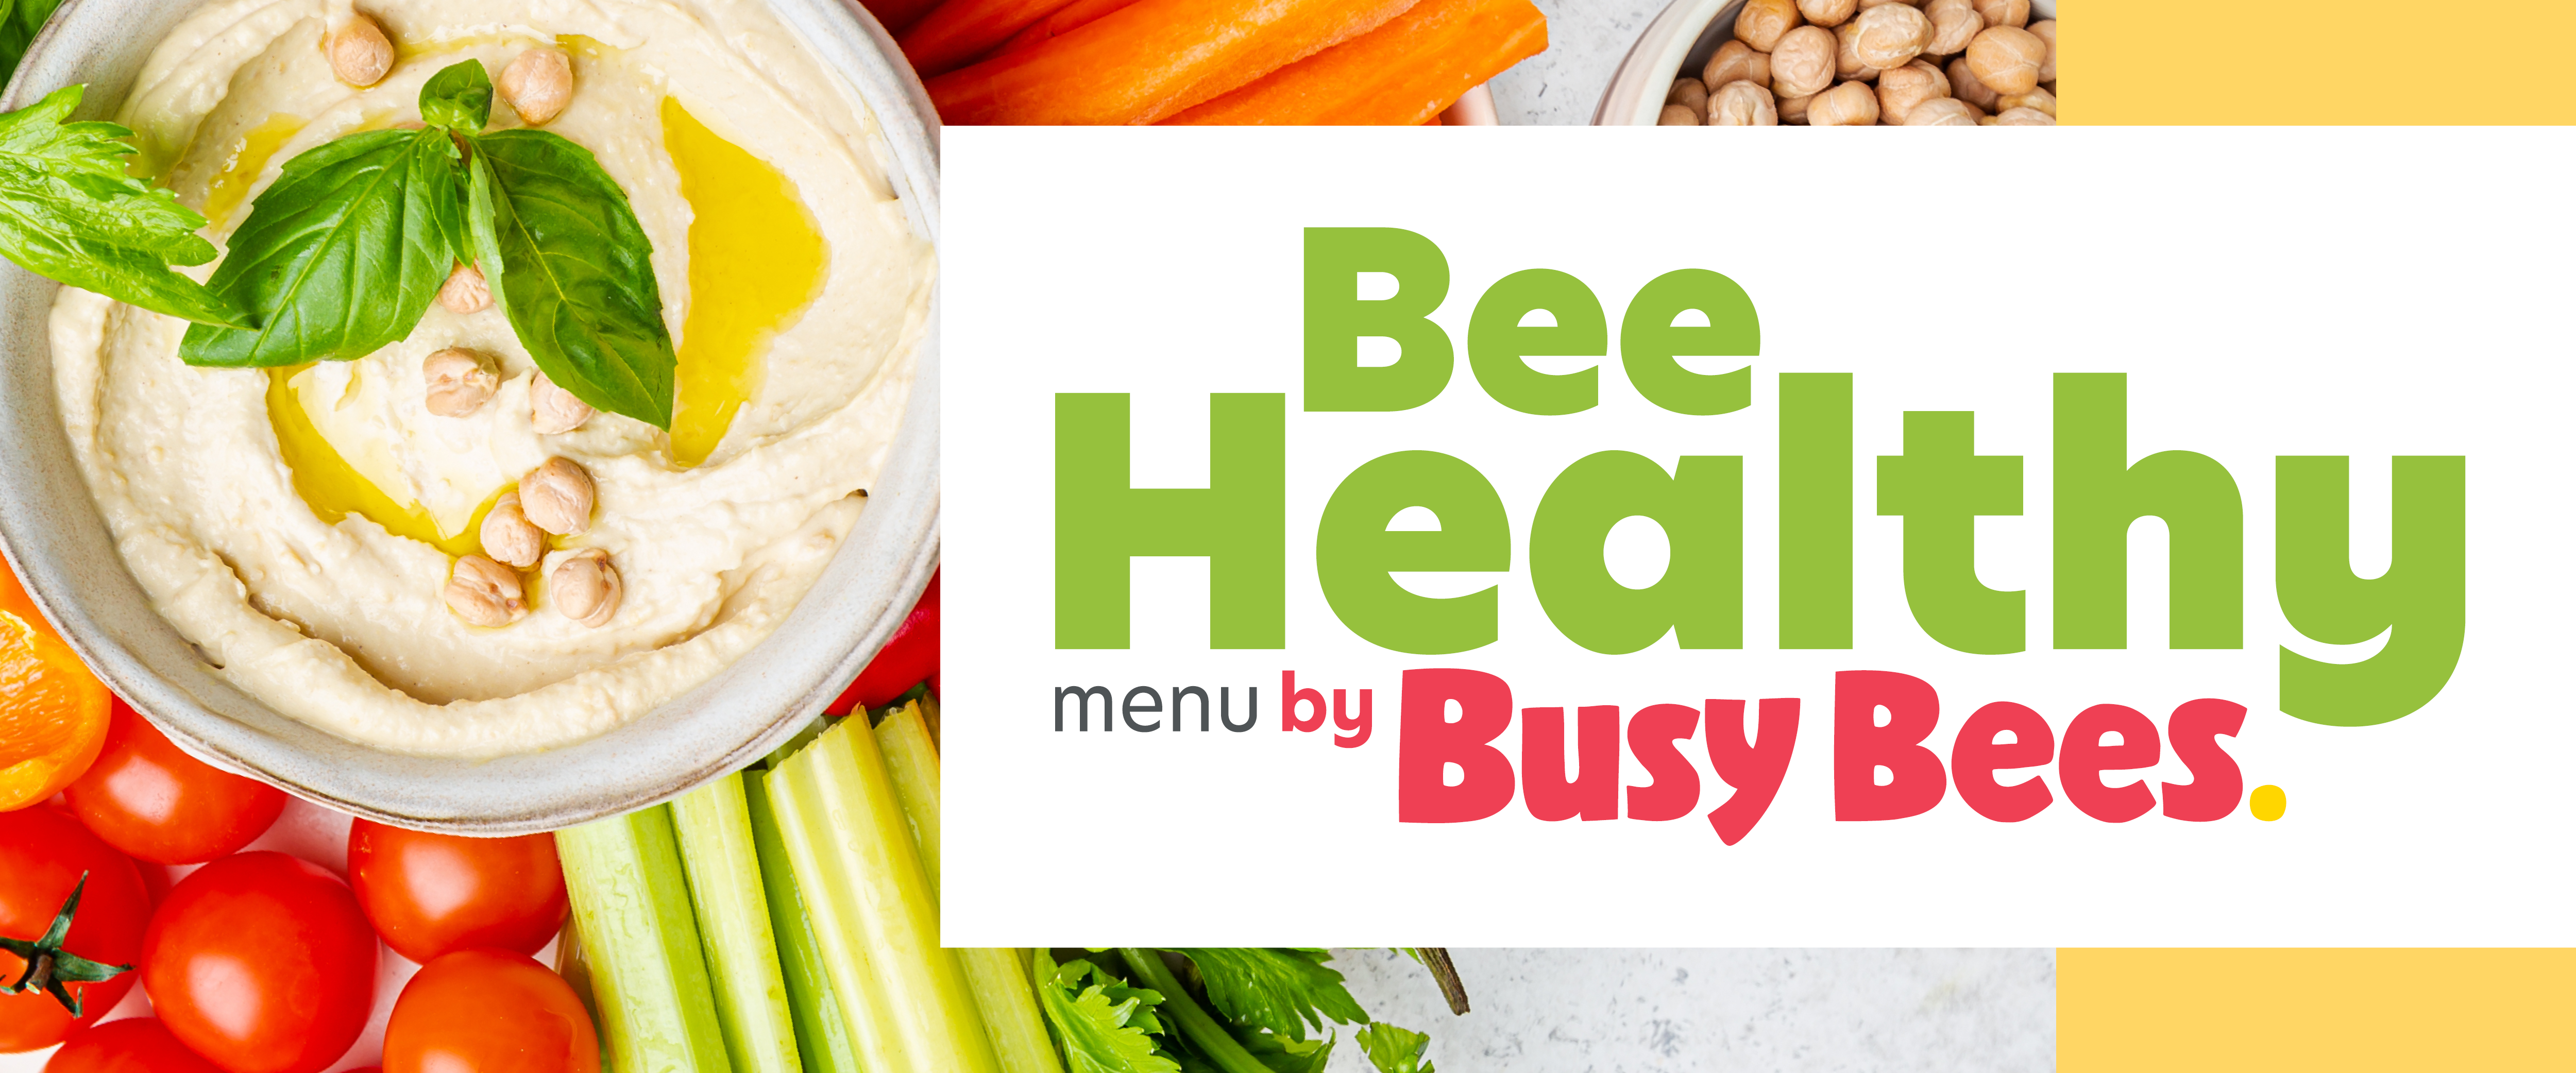 Dip with sliced vegetable with overlay text saying "Bee Healthy Menu by Busy Bees"